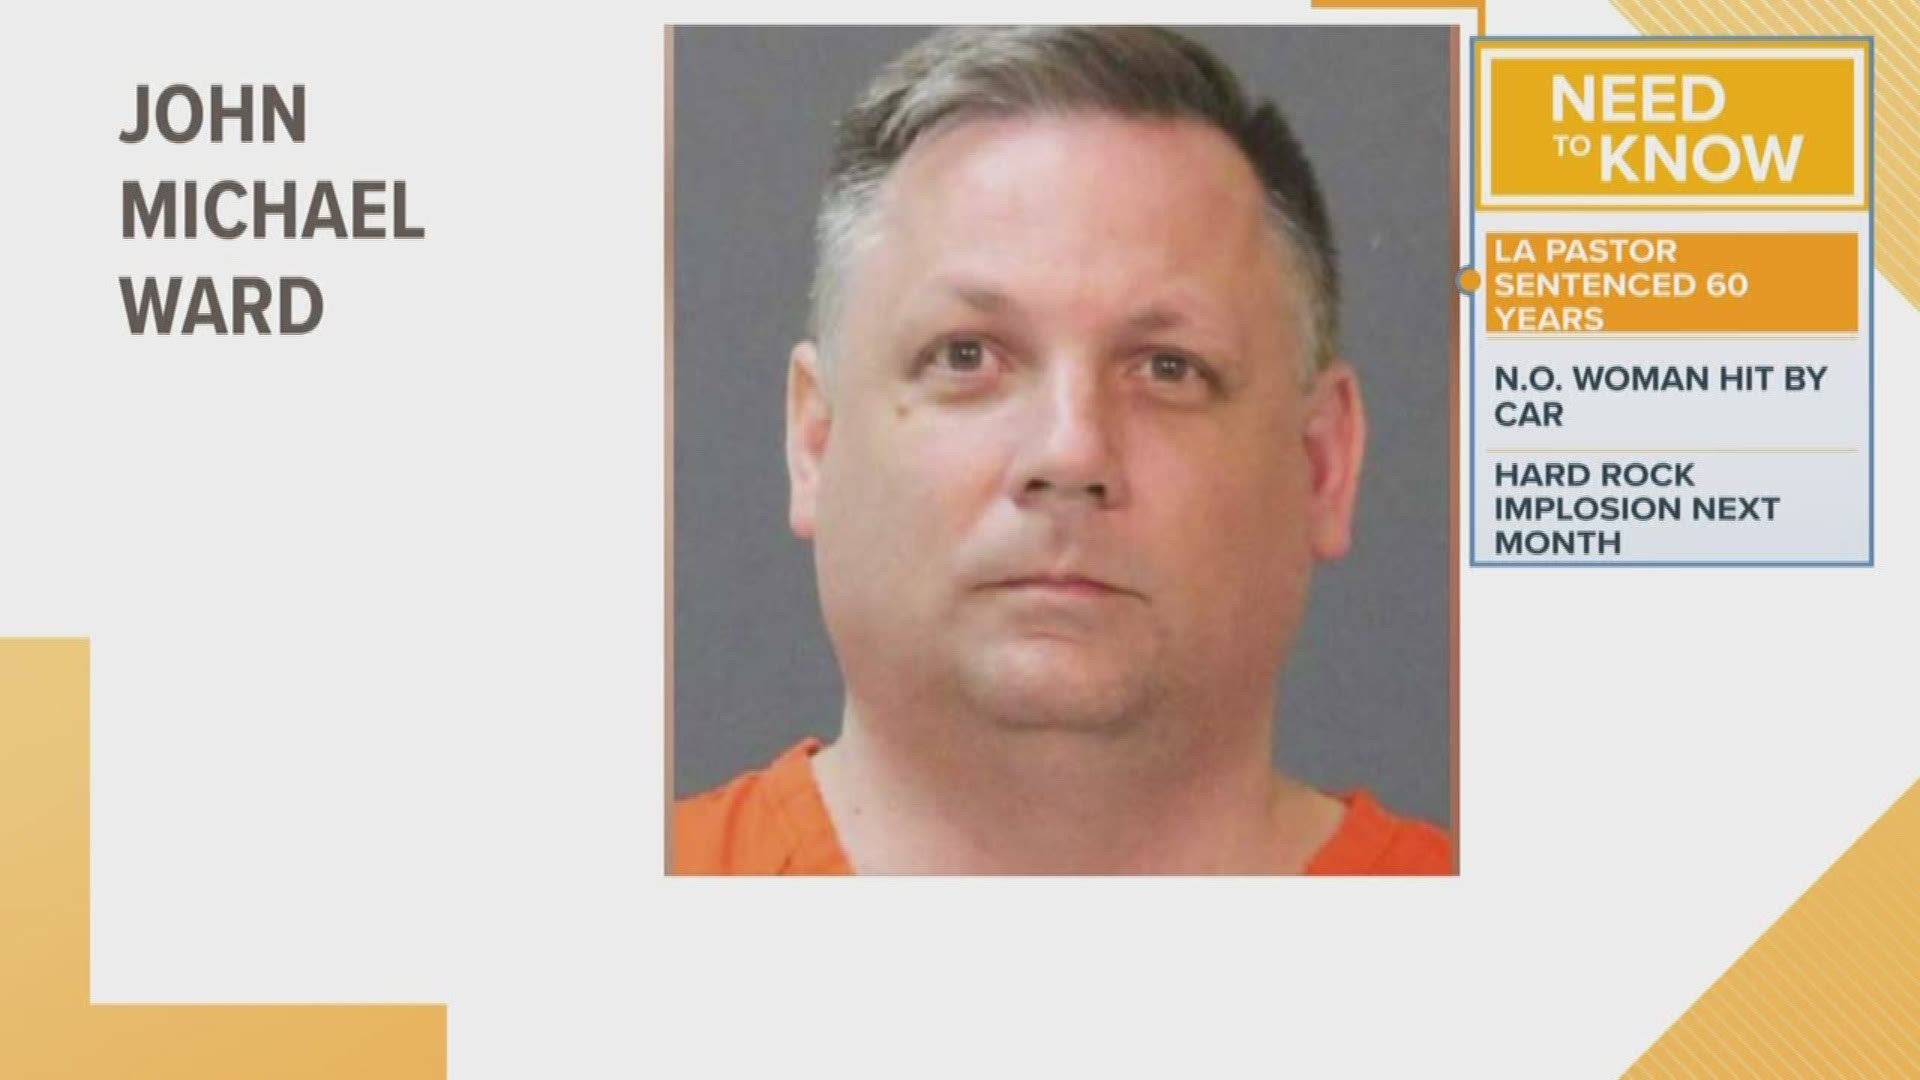 A former Louisiana pastor has been sentenced to 60 years in federal prison in a child porn case.